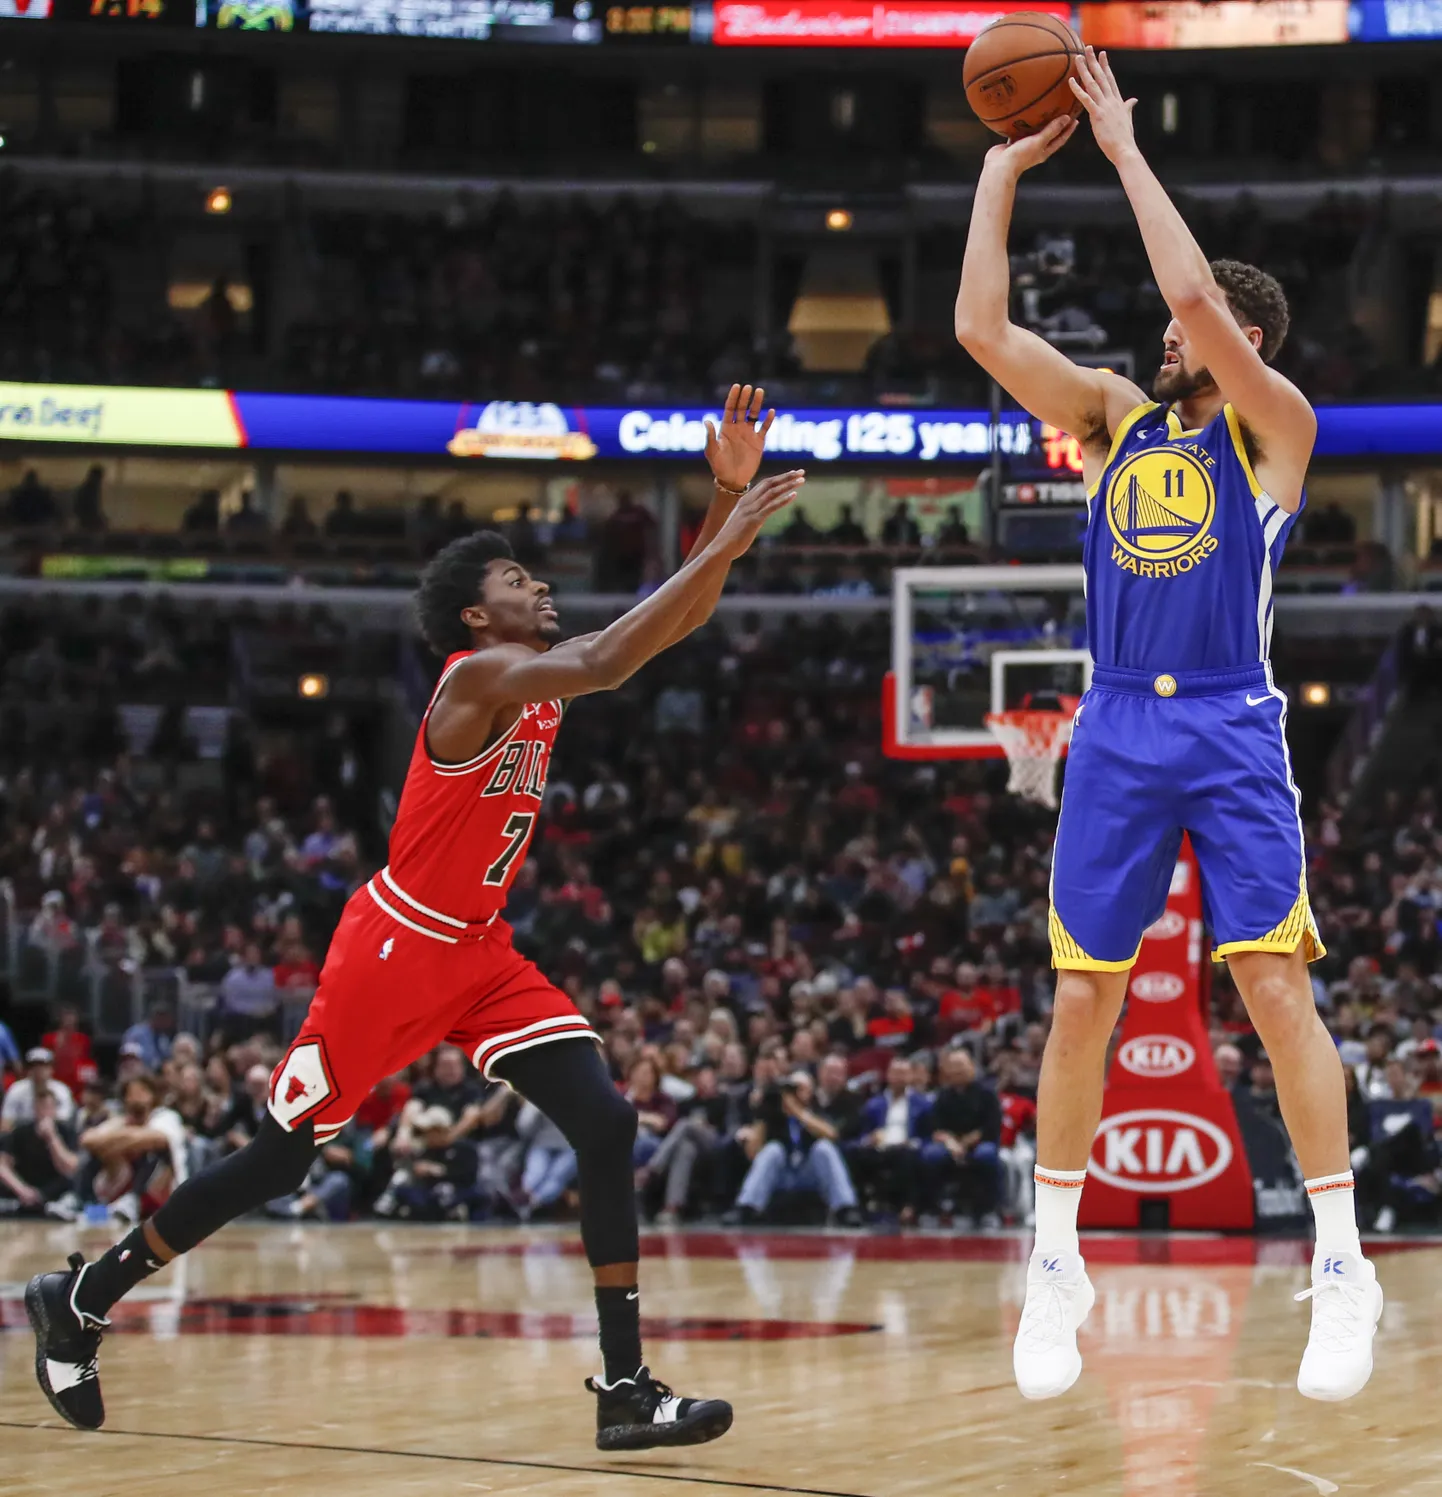 Golden State Warriors guard Klay Thompson, right, shoots a three pointer against Chicago Bulls forward Justin Holiday, left, during the first half of an NBA basketball game, Monday, Oct. 29, 2018, in Chicago. (AP Photo/Kamil Krzaczynski)